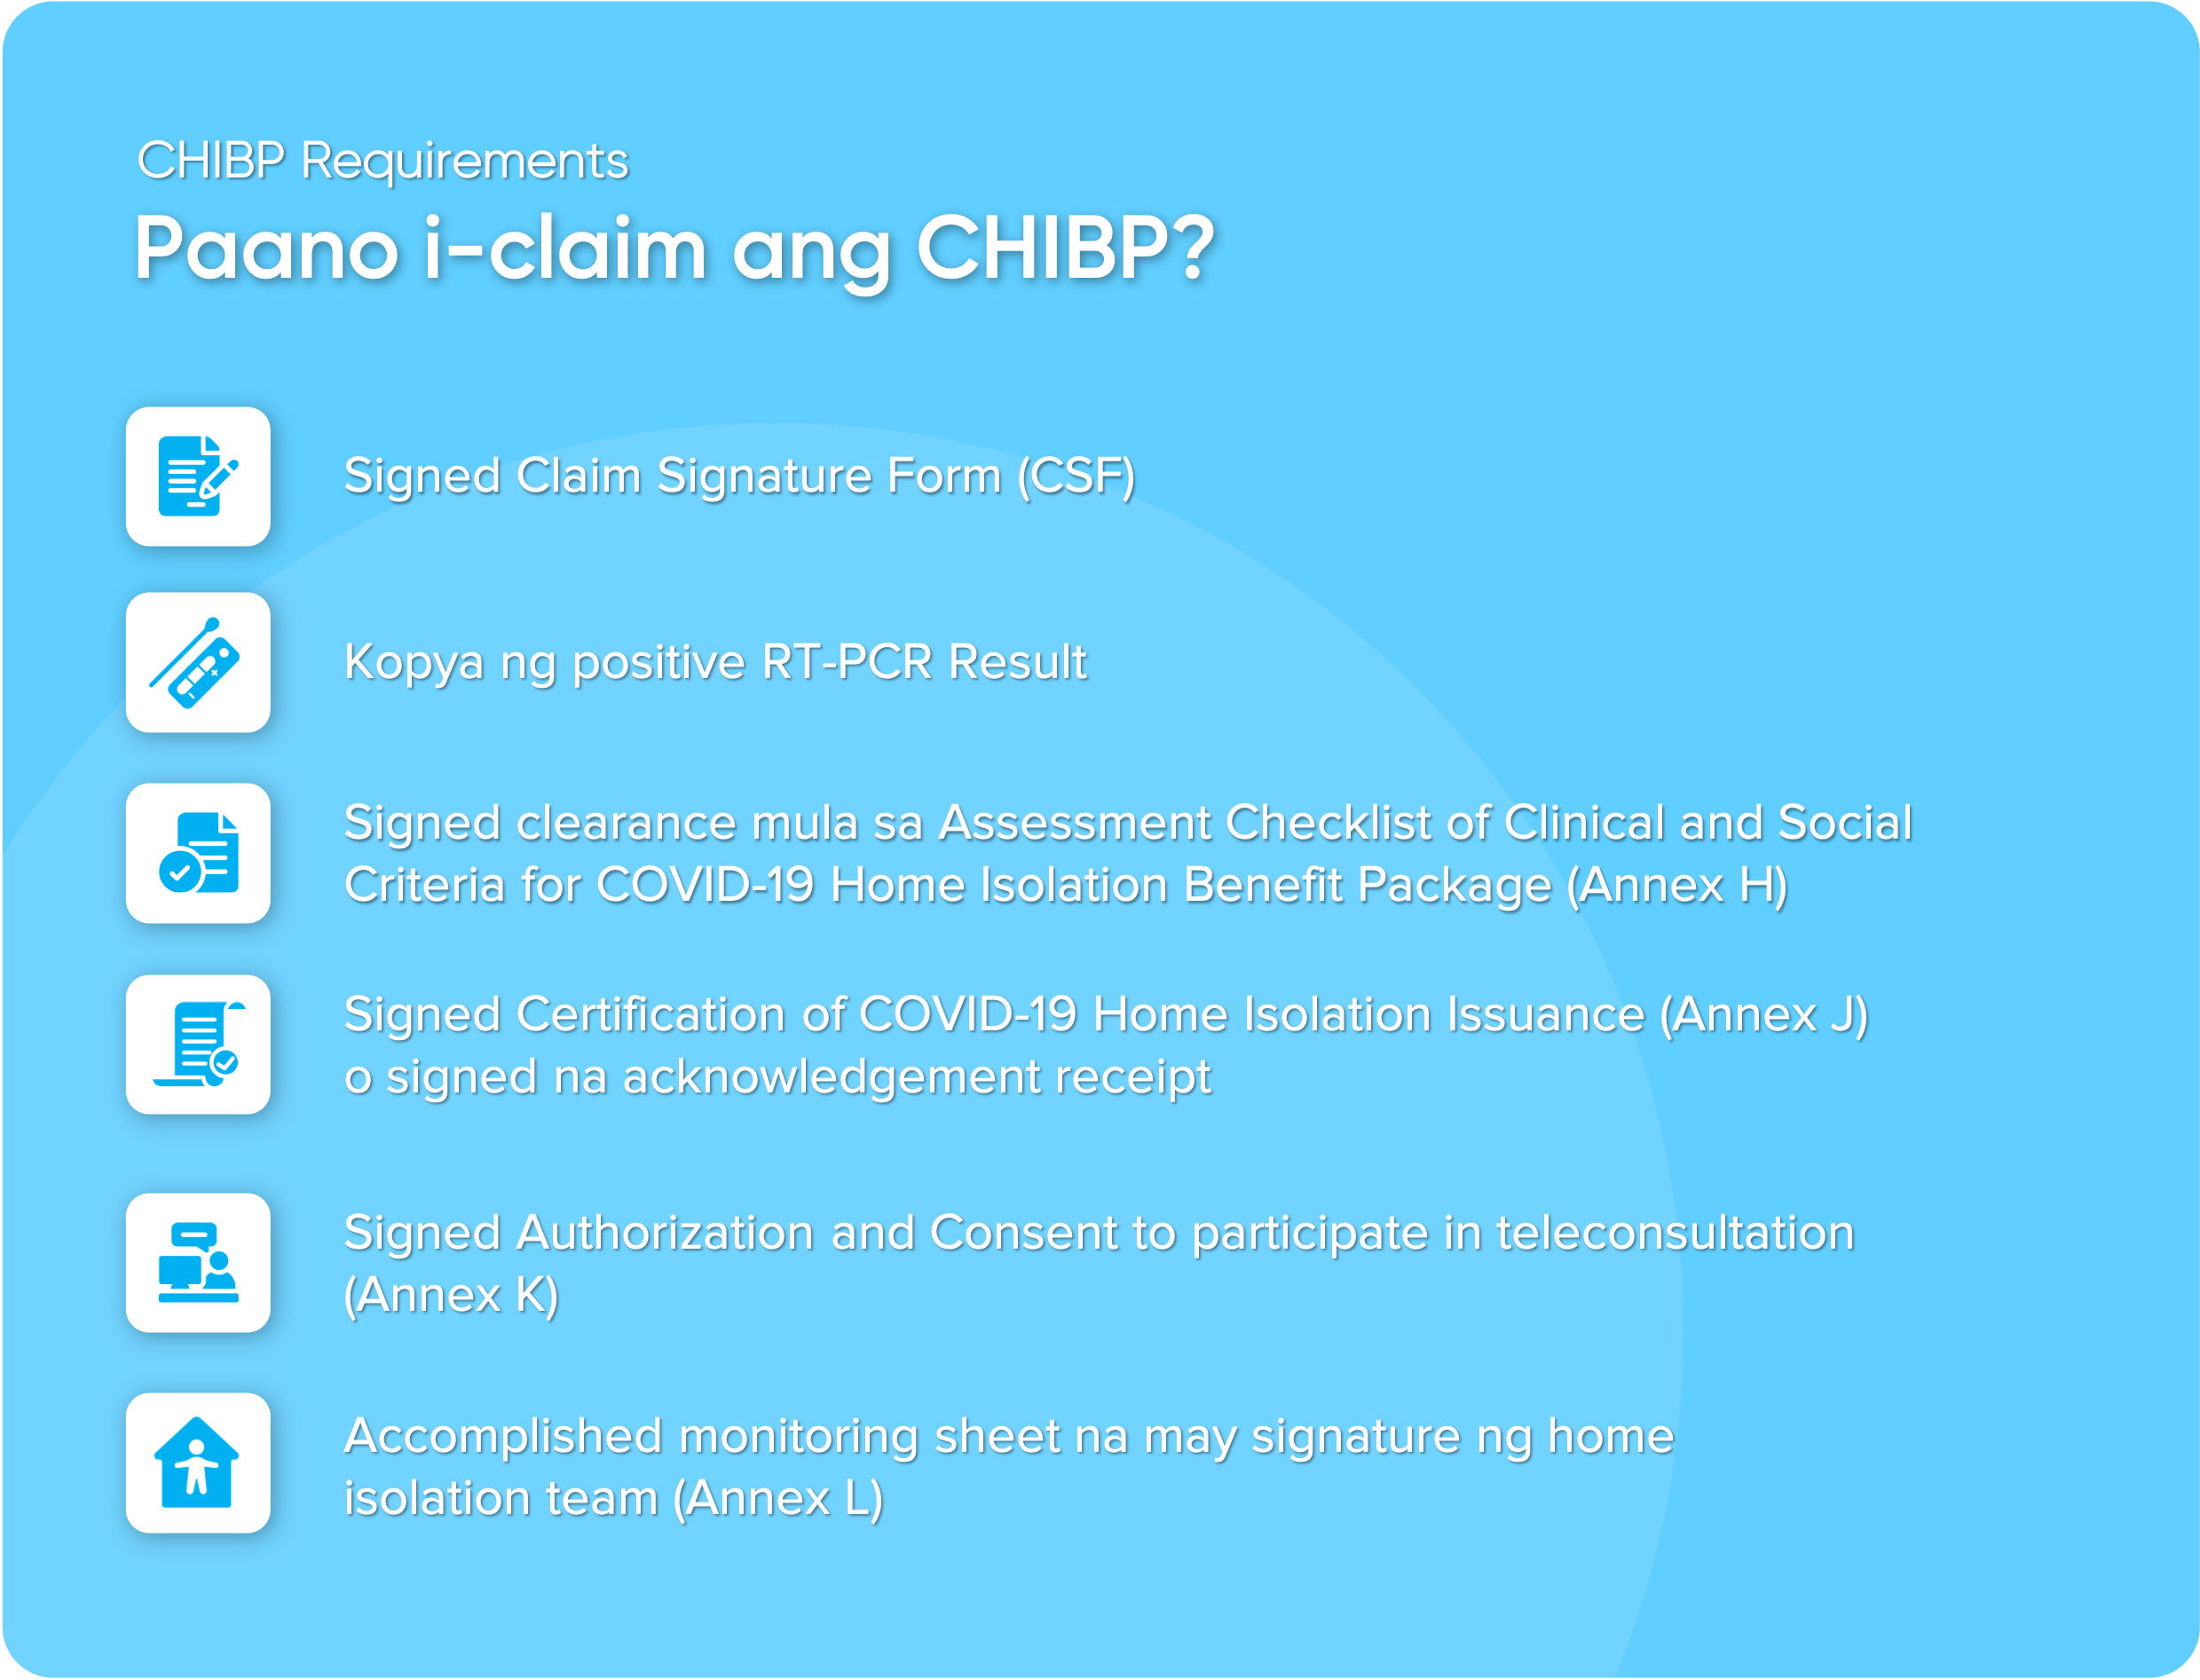 How to claim CHIBP